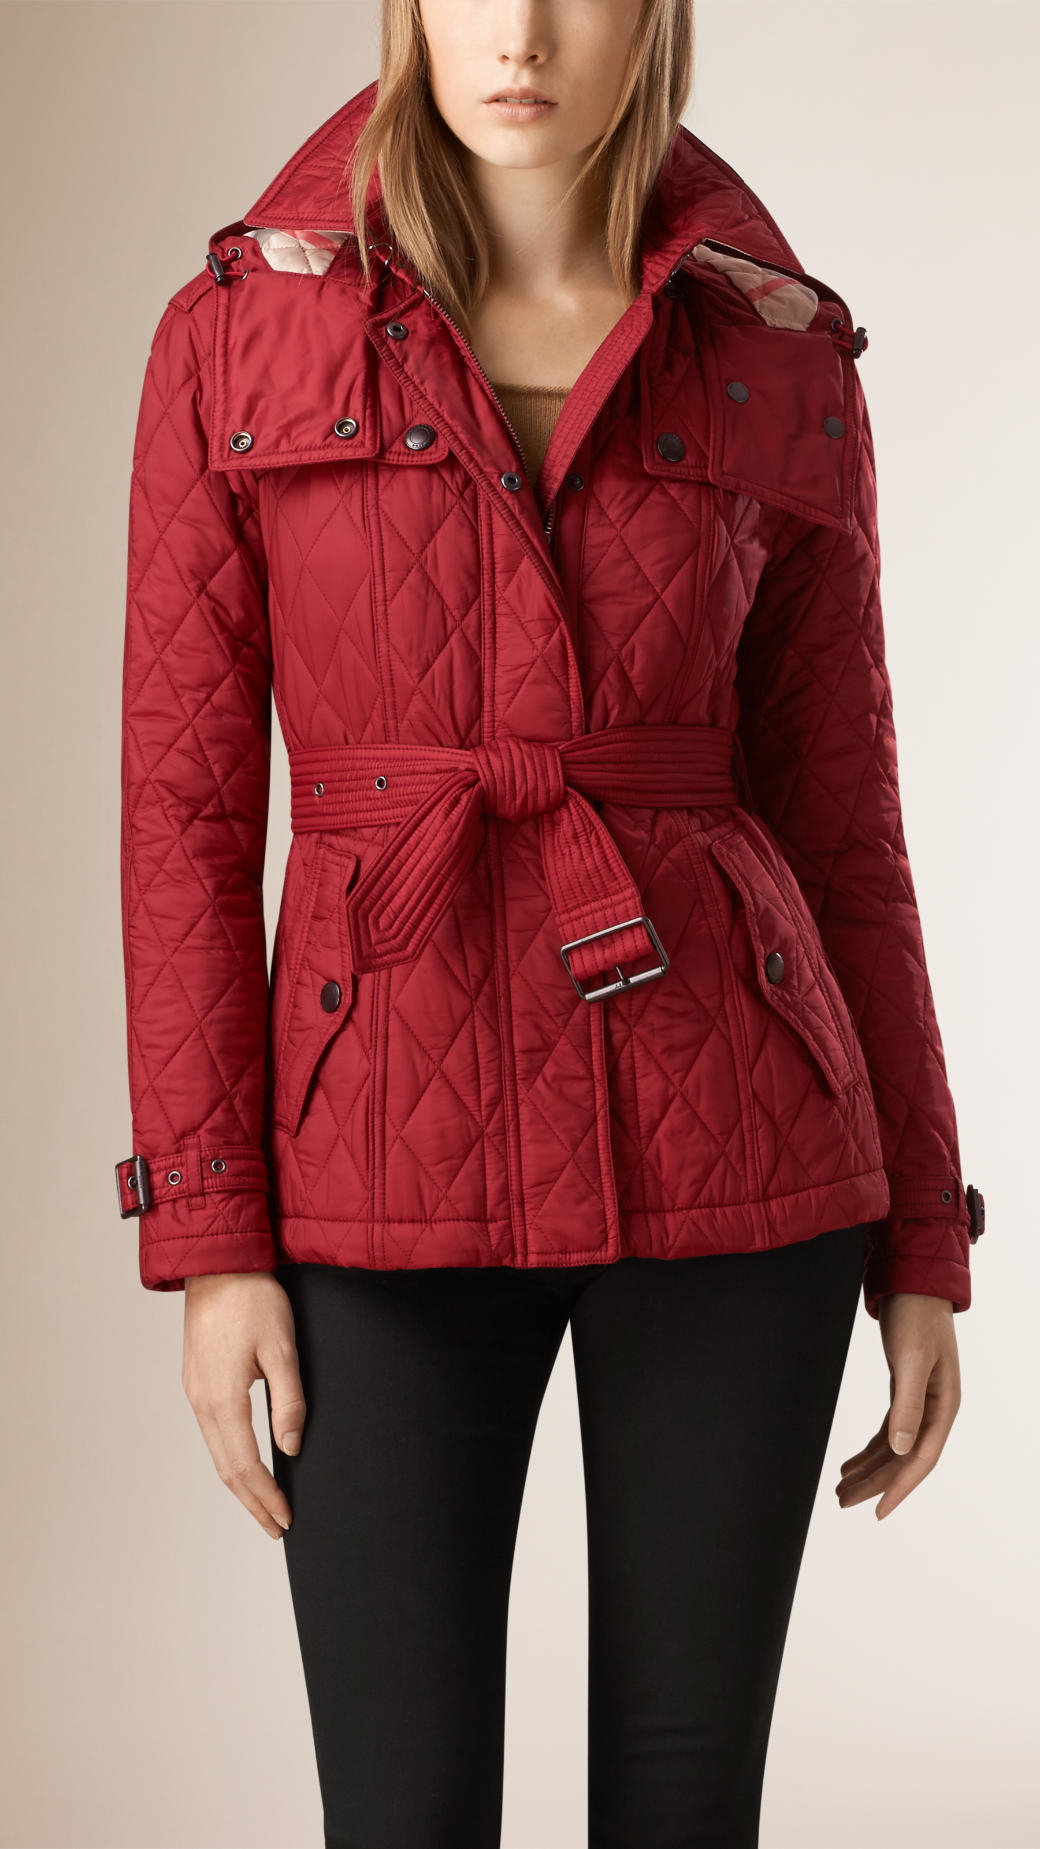 Burberry Diamond Quilted Jacket With Detachable Hood in Red (dark ...